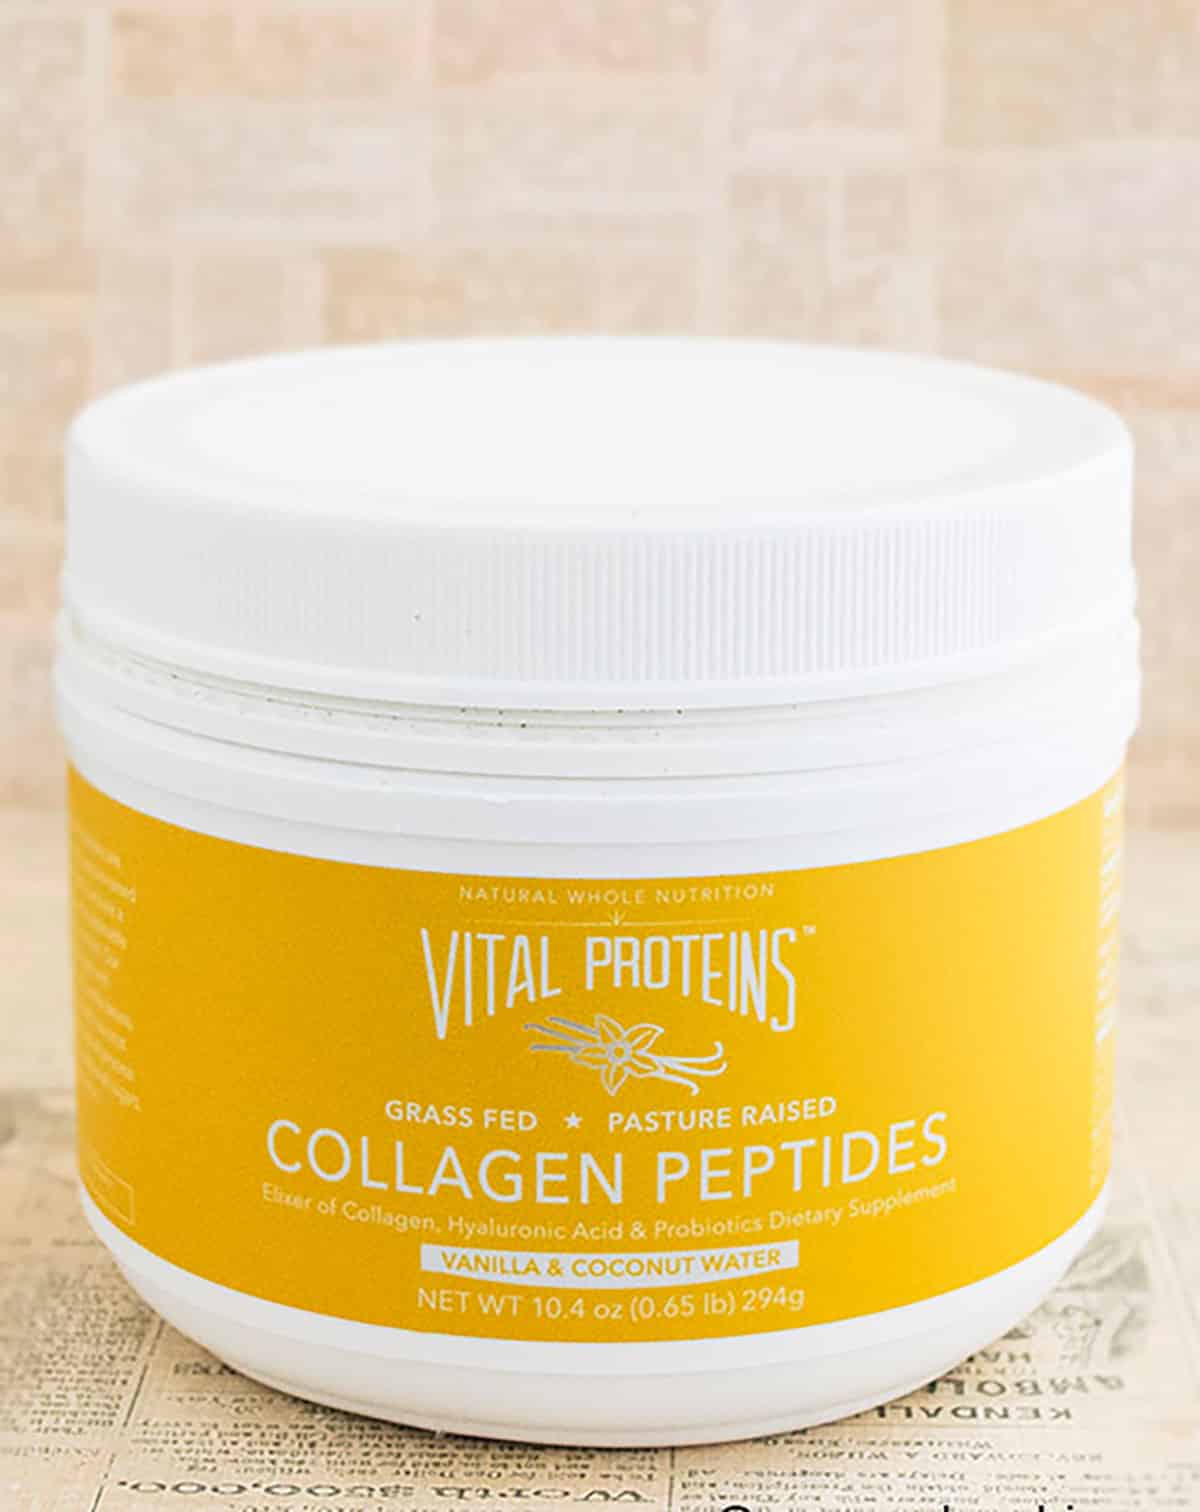 Container of Vital Proteins Collagen Peptides on a Rustic Brown Background.